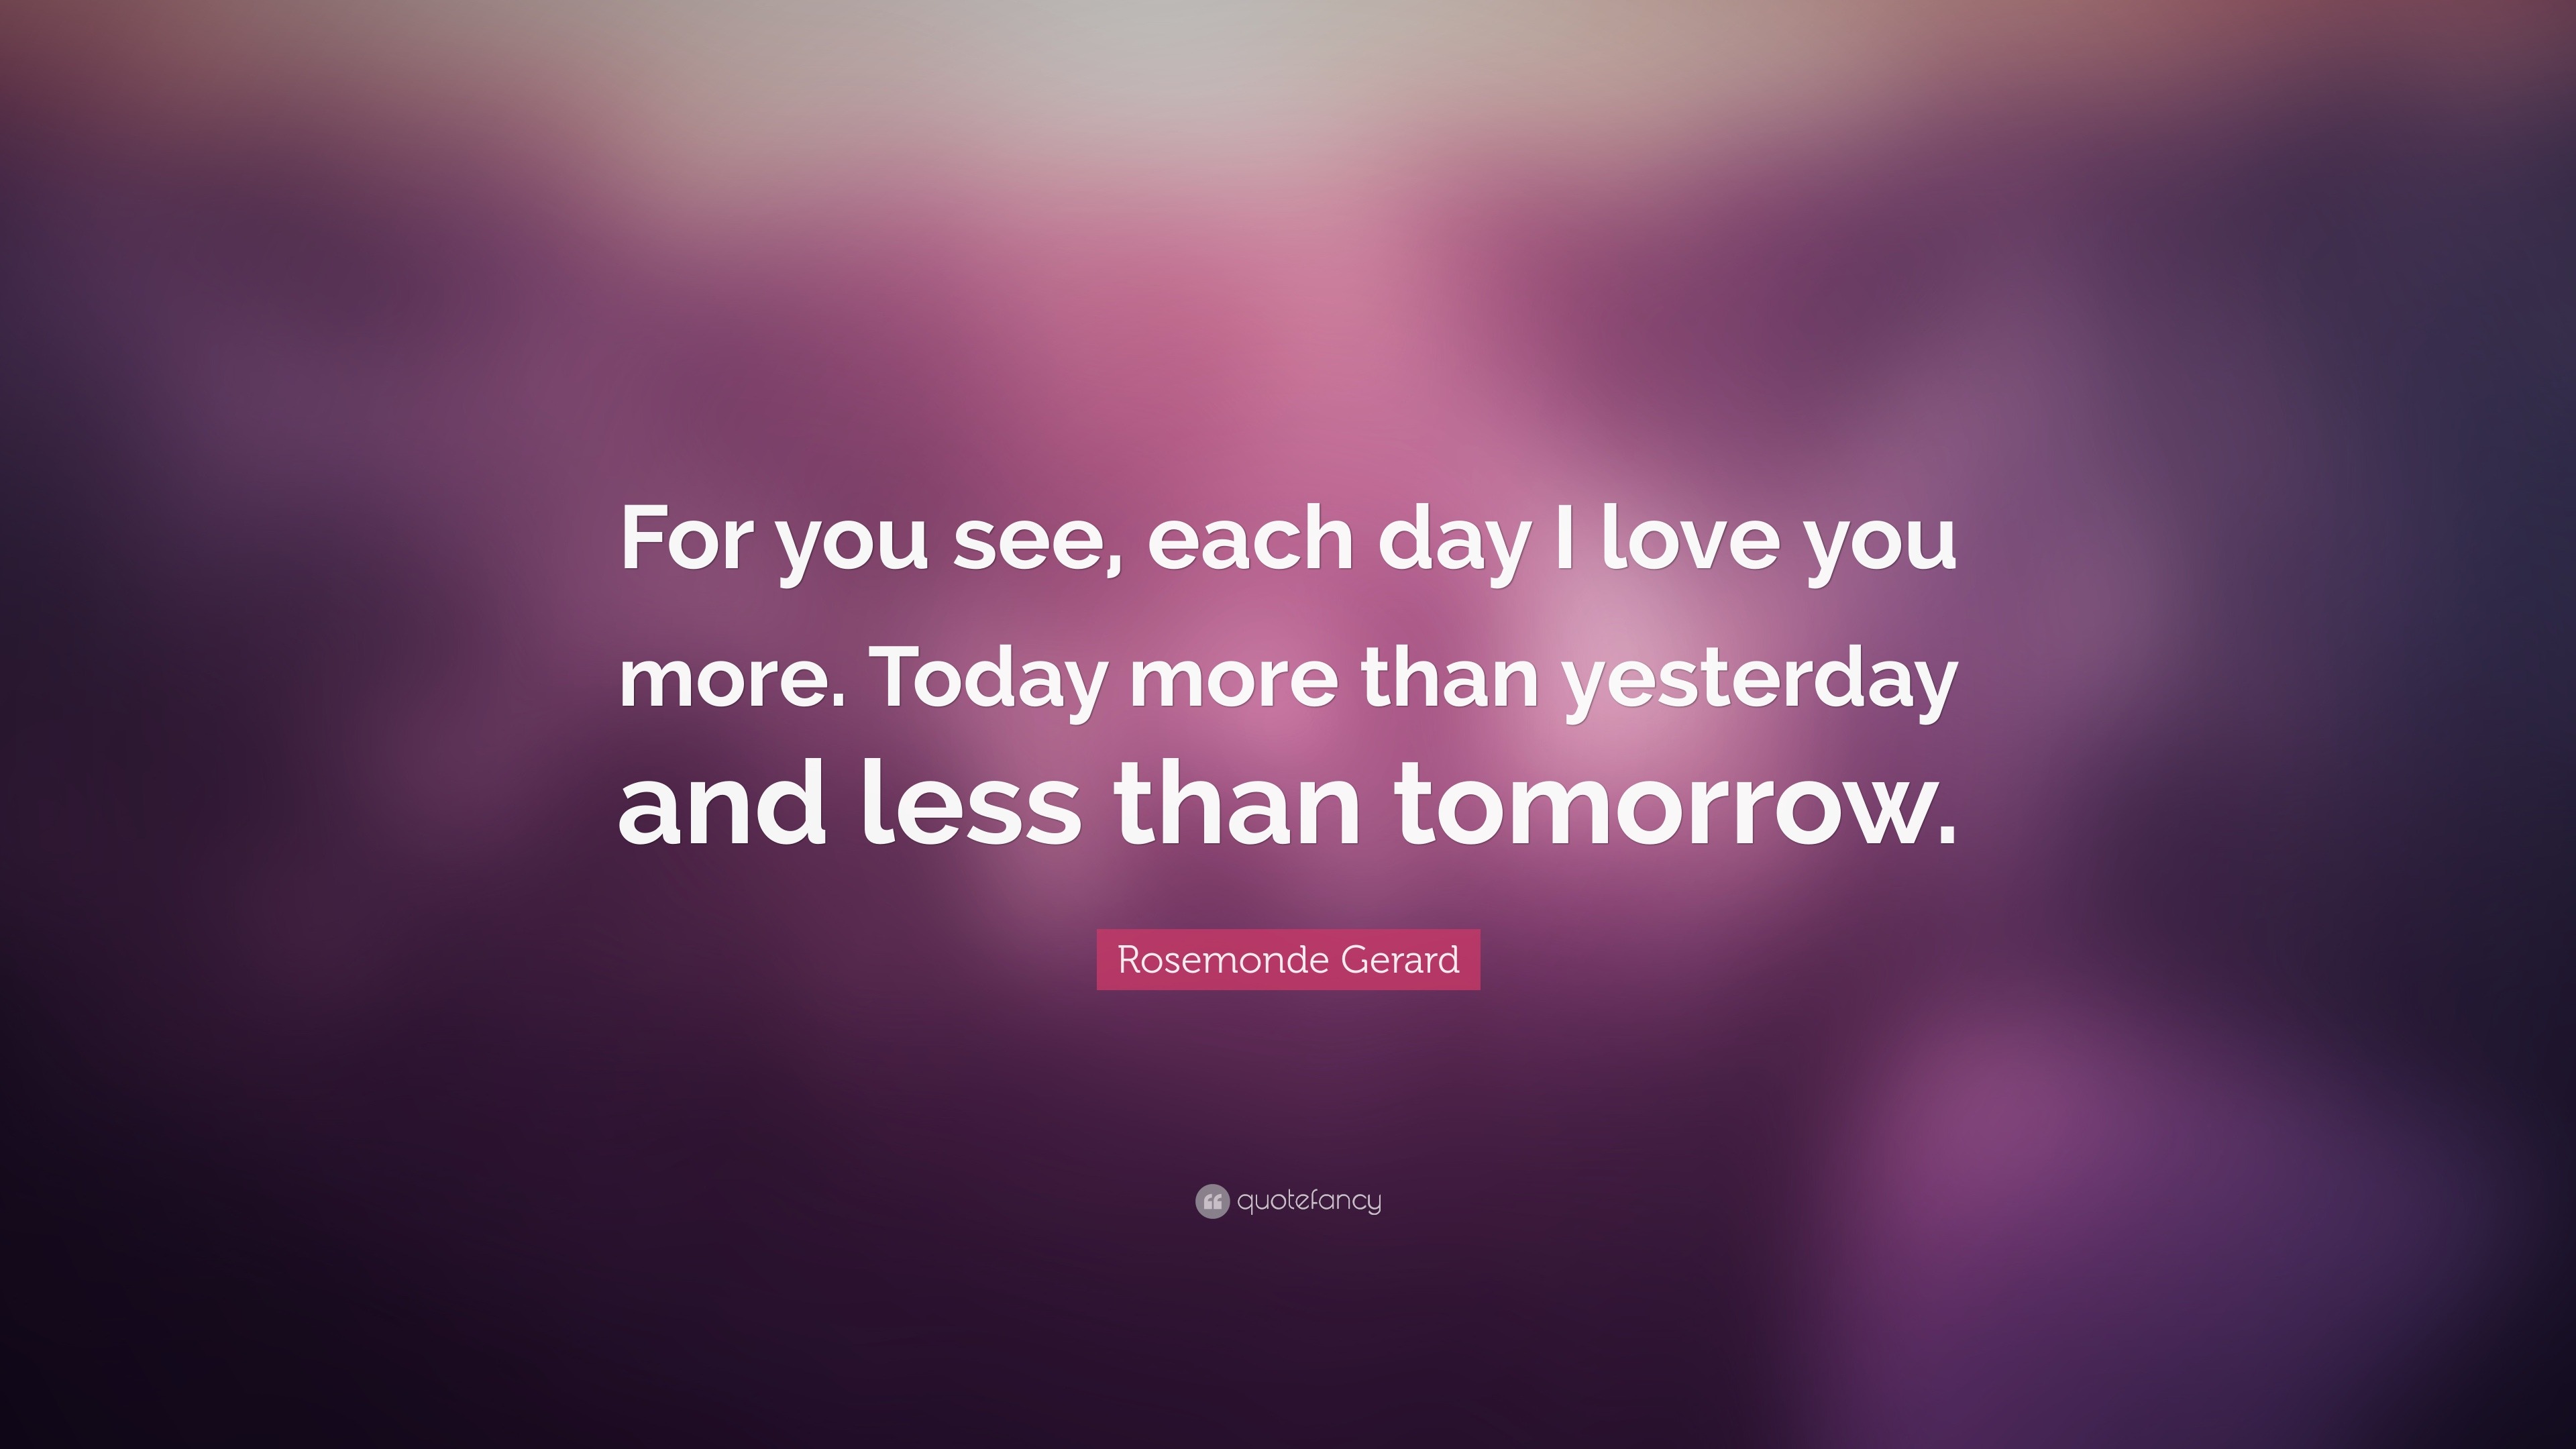 Rosemonde Gerard Quote “For you see each day I love you more